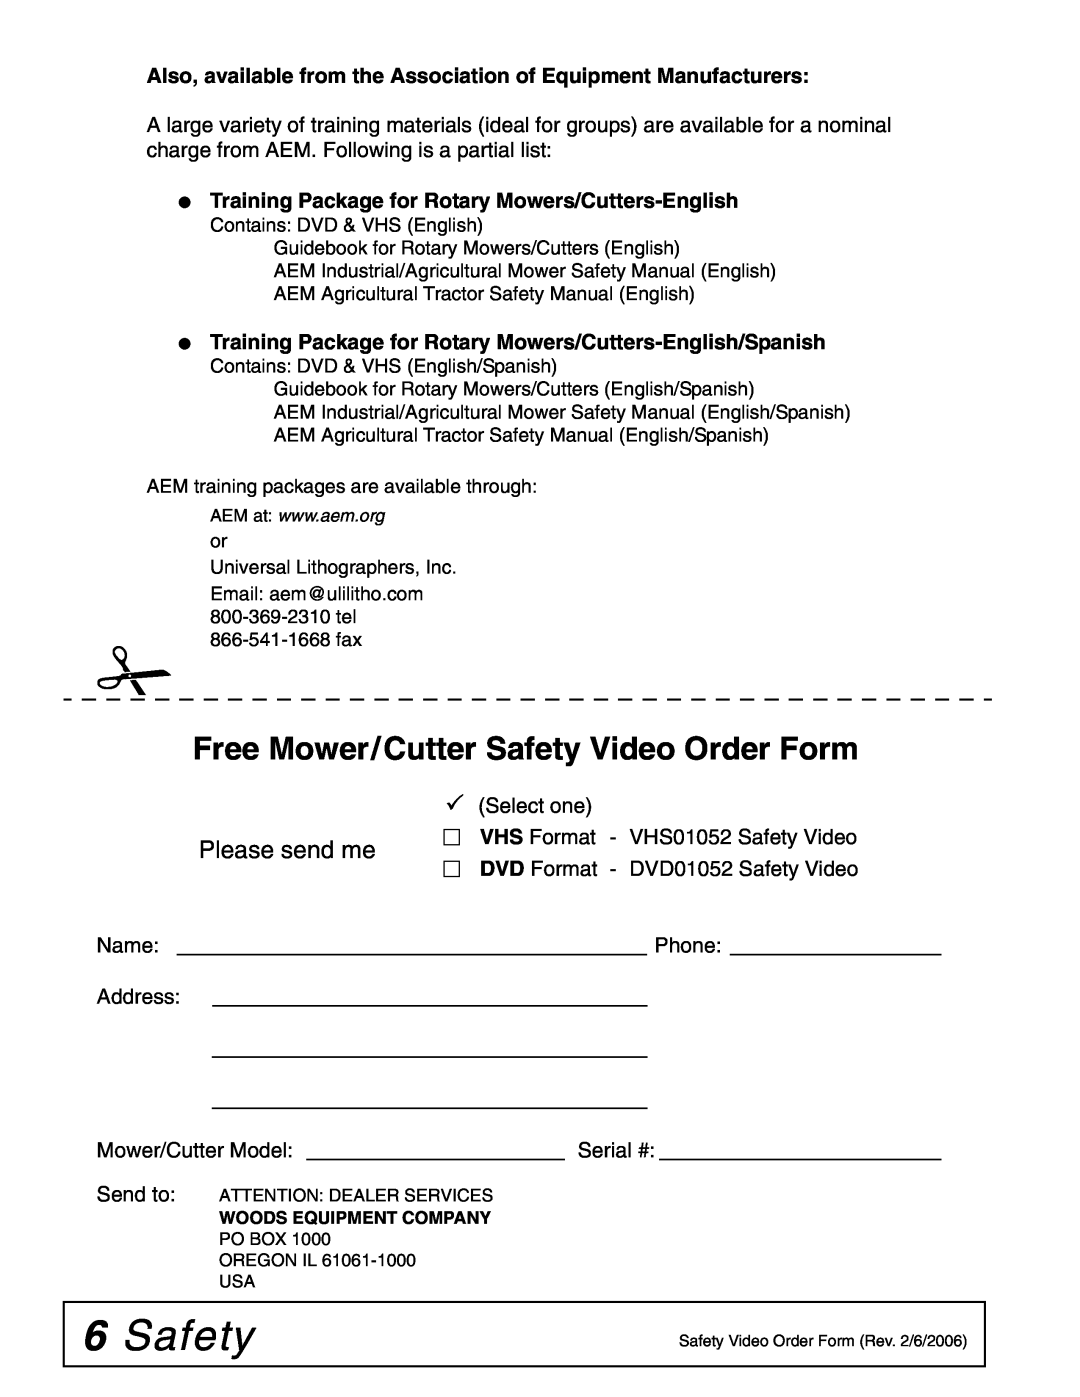 Woods Equipment BW240HDQ Free Mower/Cutter Safety Video Order Form, Please send me, Select one, Name Phone Address 